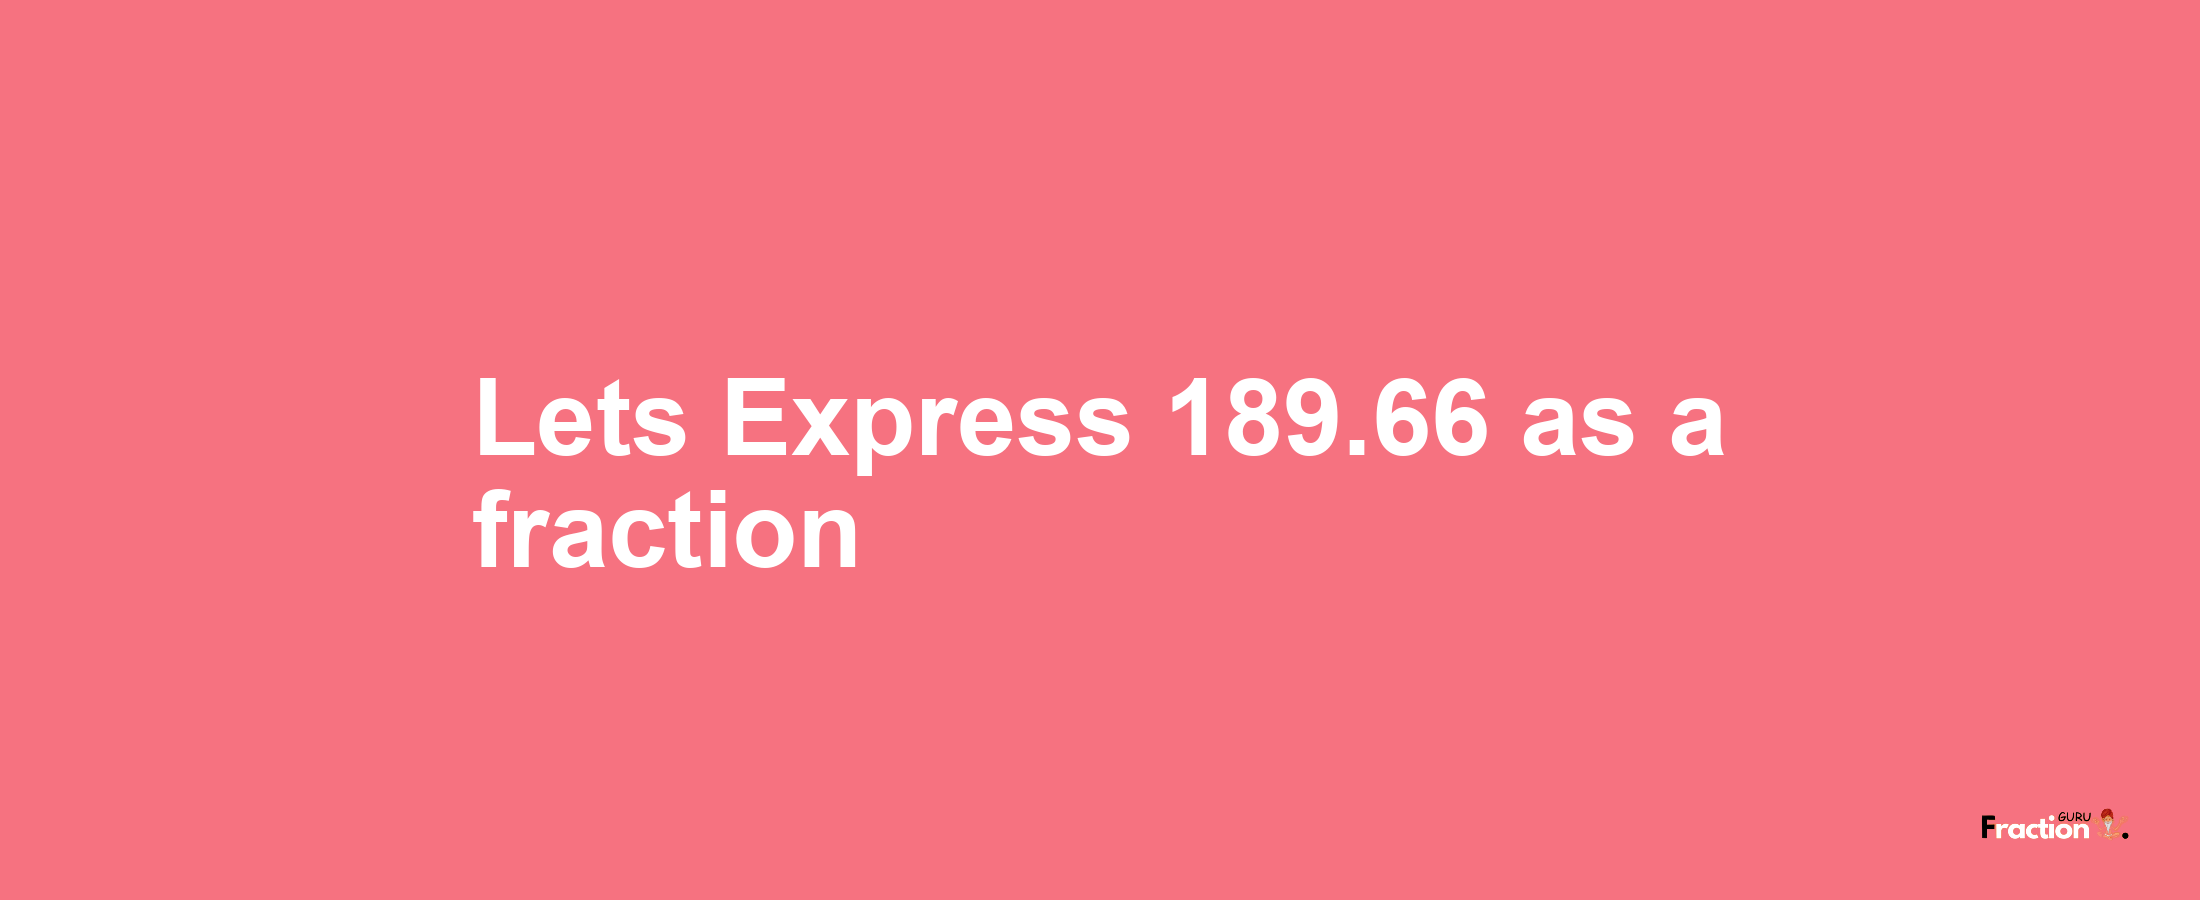 Lets Express 189.66 as afraction